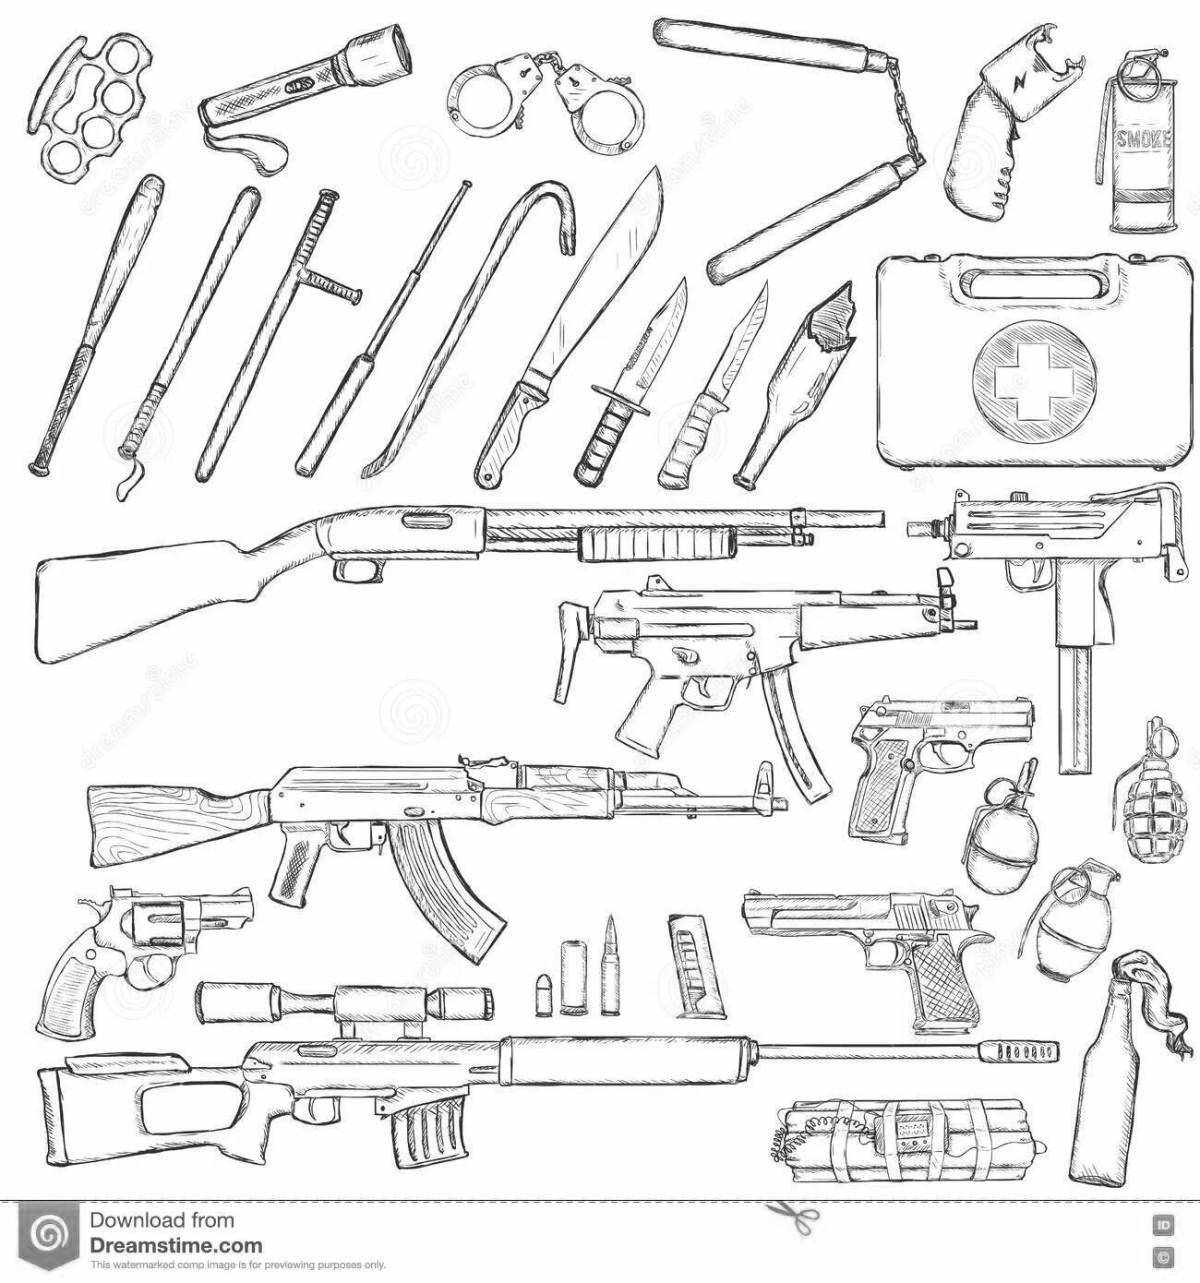 Great coloring book with cool weapons